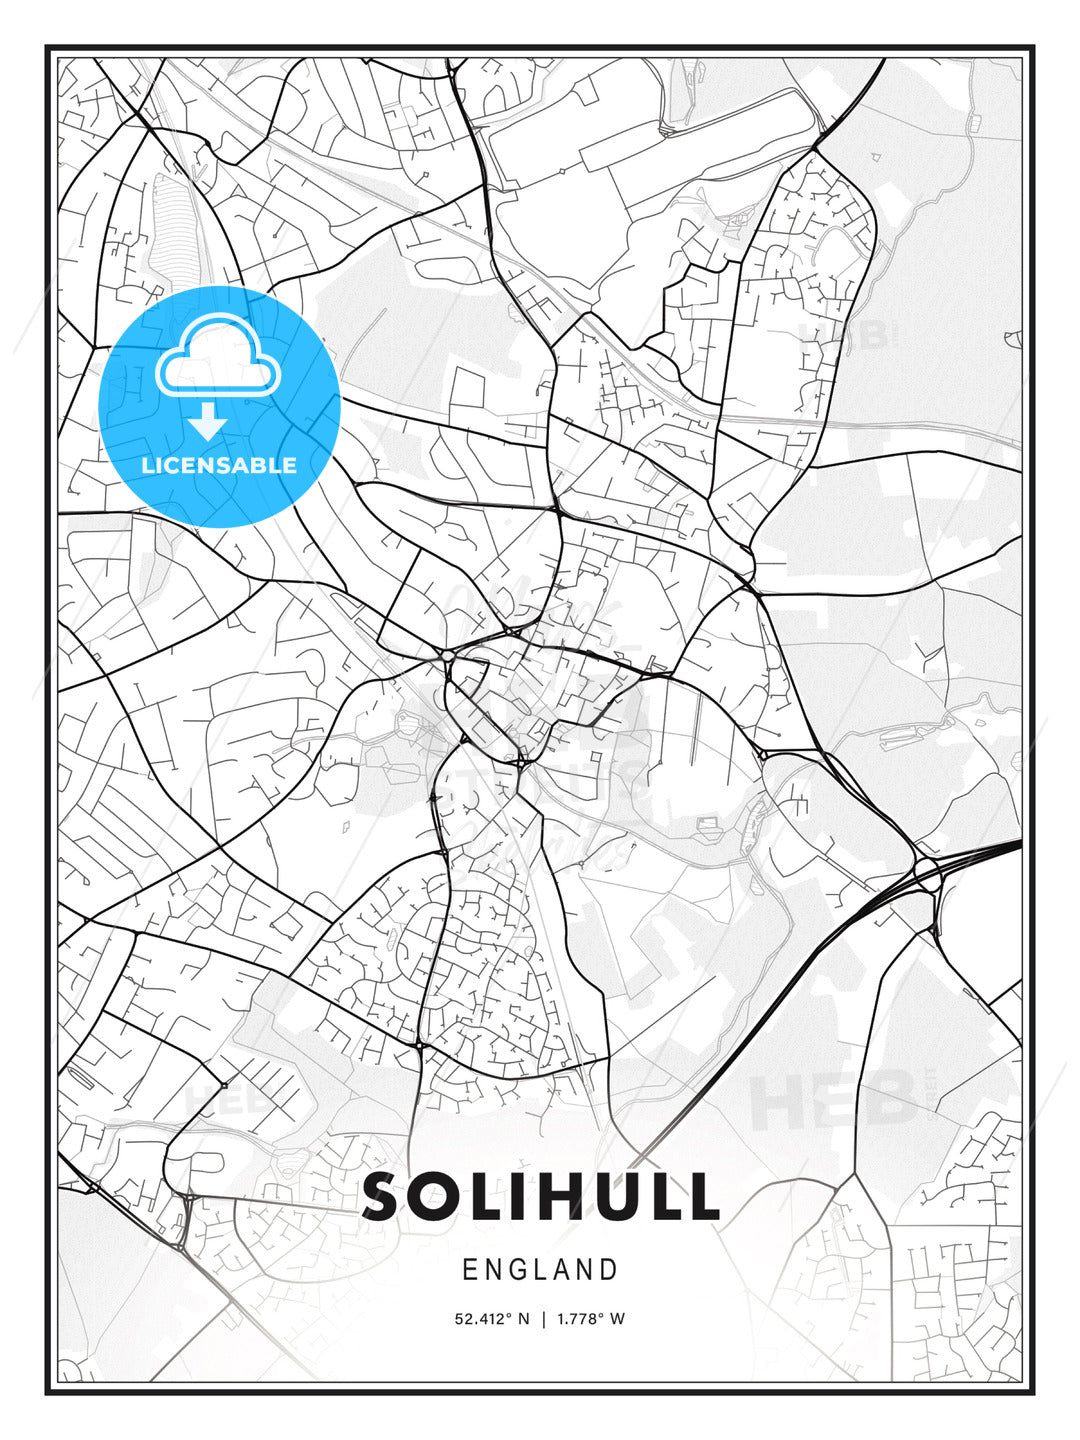 Solihull, England, Modern Print Template in Various Formats - HEBSTREITS Sketches